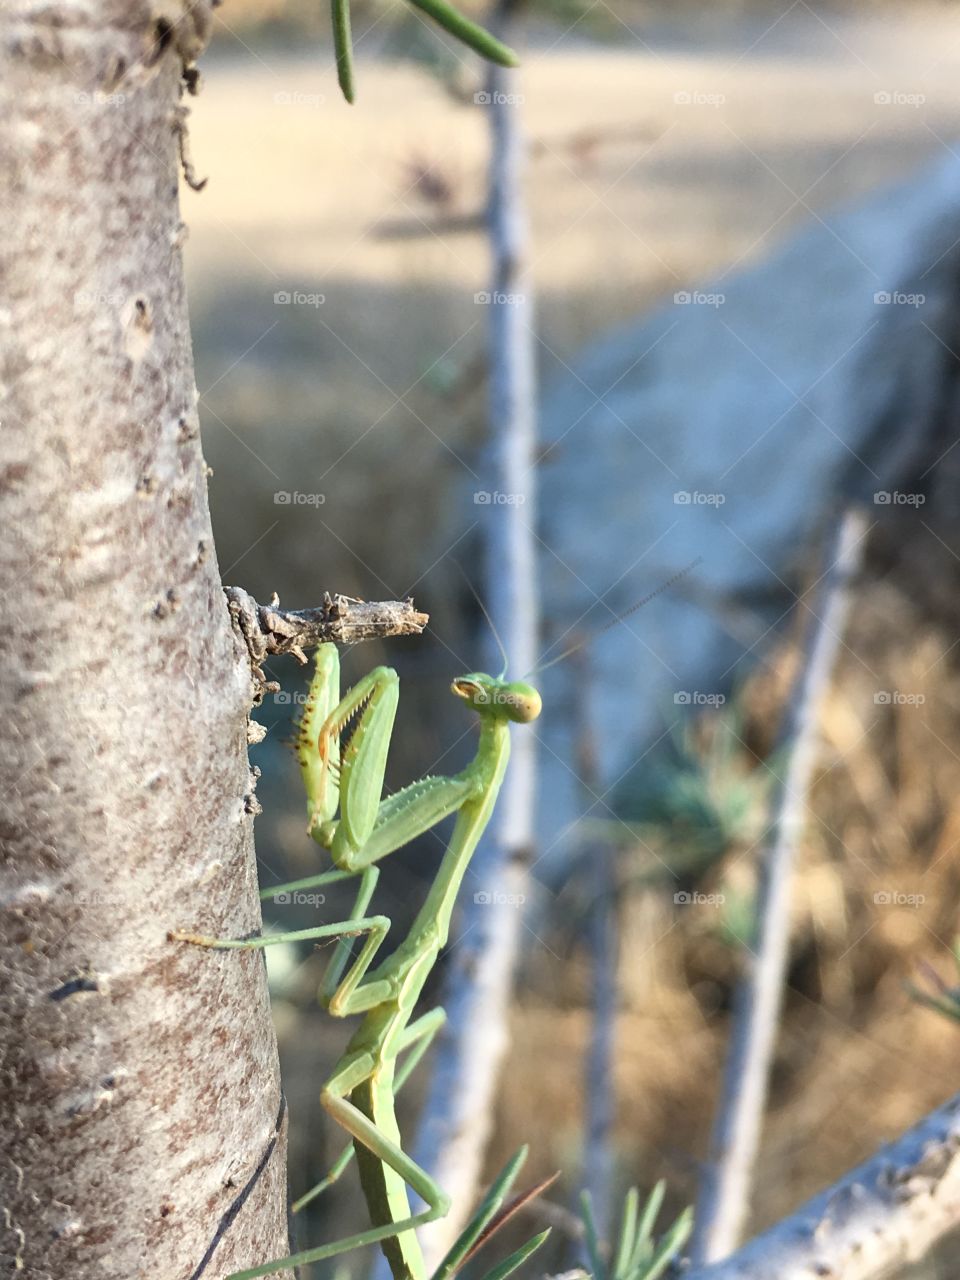 Another praying mantis I put on the tree 